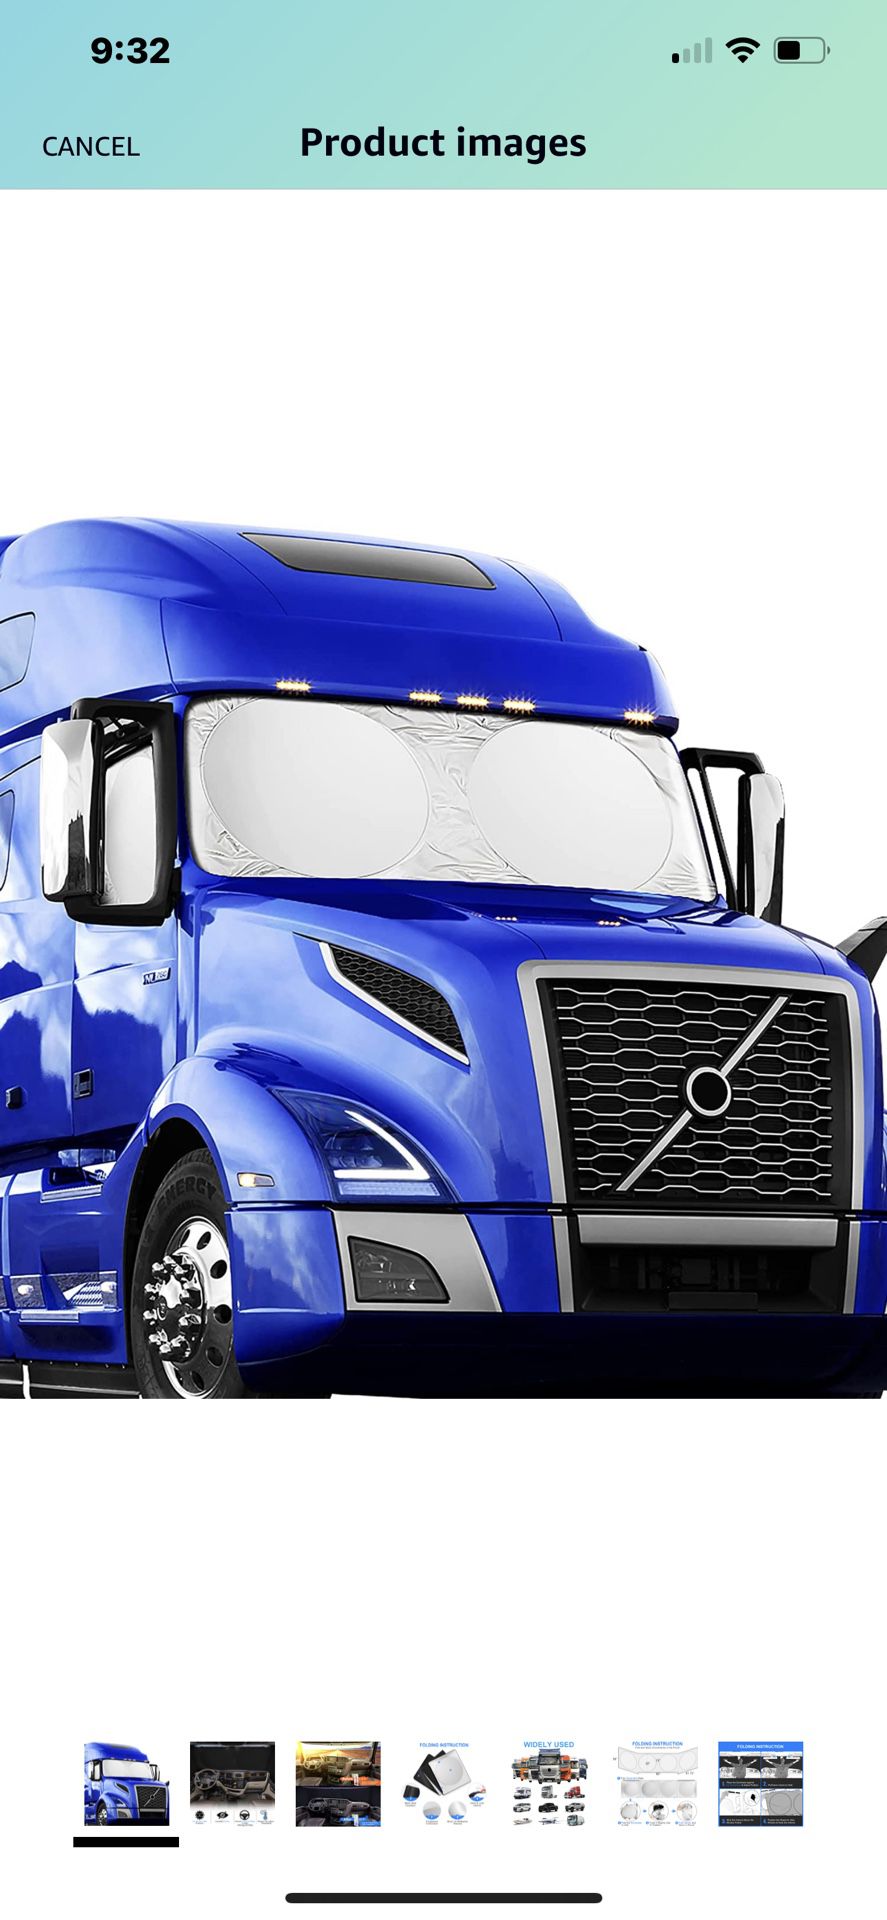 Semi-Truck Sun Shade for Windshield and Side Window,Maximum Coverage Sunshade for Automotive Windshield to Block UV/Sun Heat Rays and Lower Cab Temper